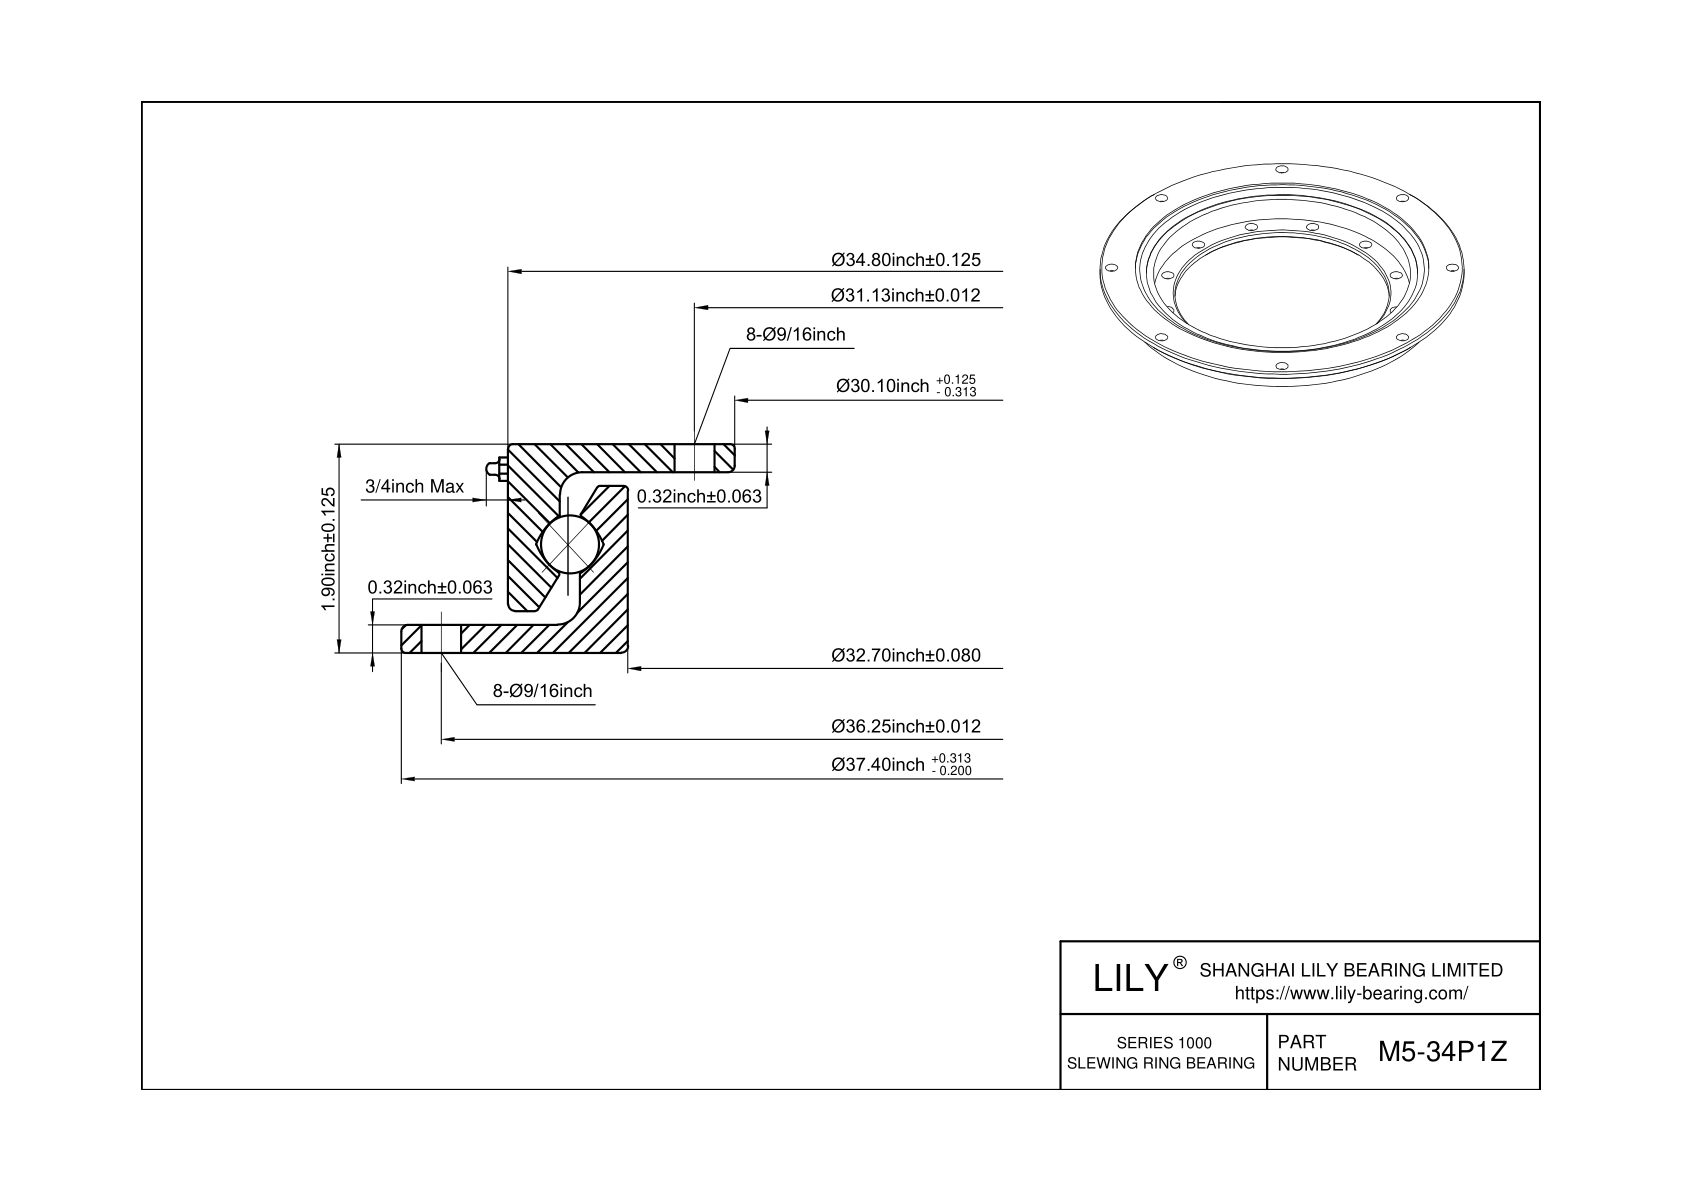 M5-34P1Z Developed For Use In Transport Vehicles cad drawing